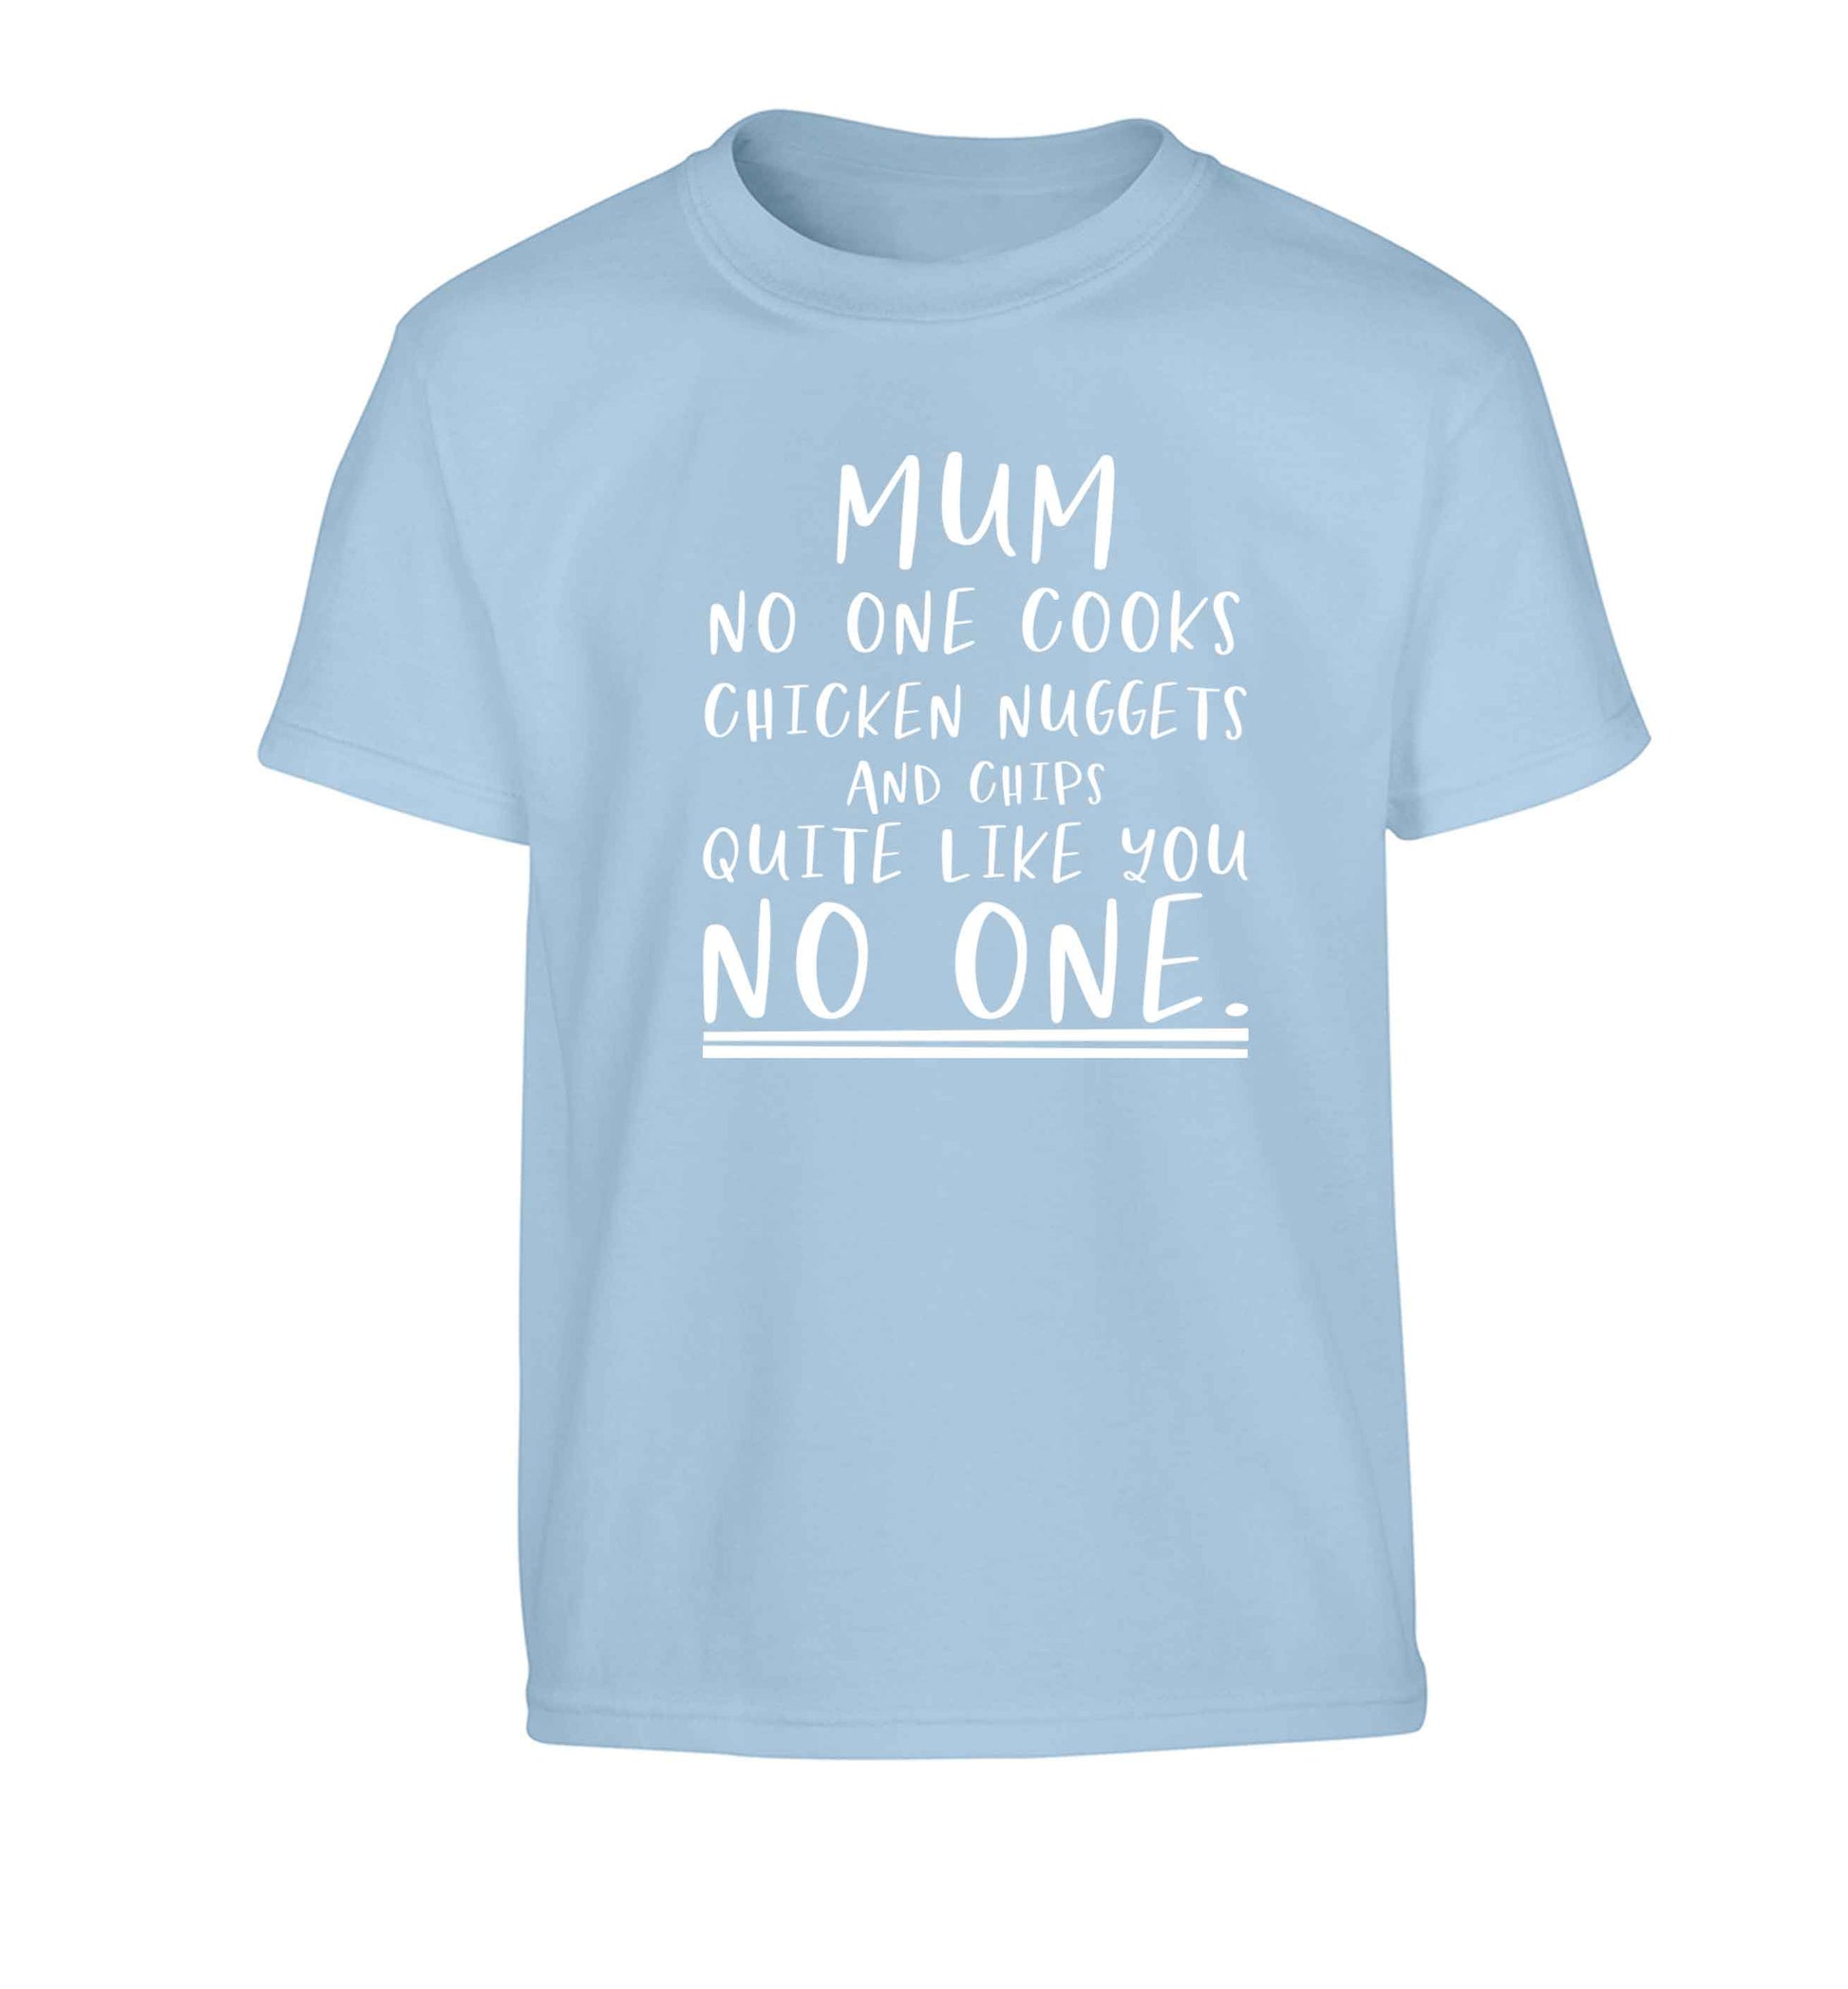 Super funny sassy gift for mother's day or birthday!  Mum no one cooks chicken nuggets and chips like you no one Children's light blue Tshirt 12-13 Years